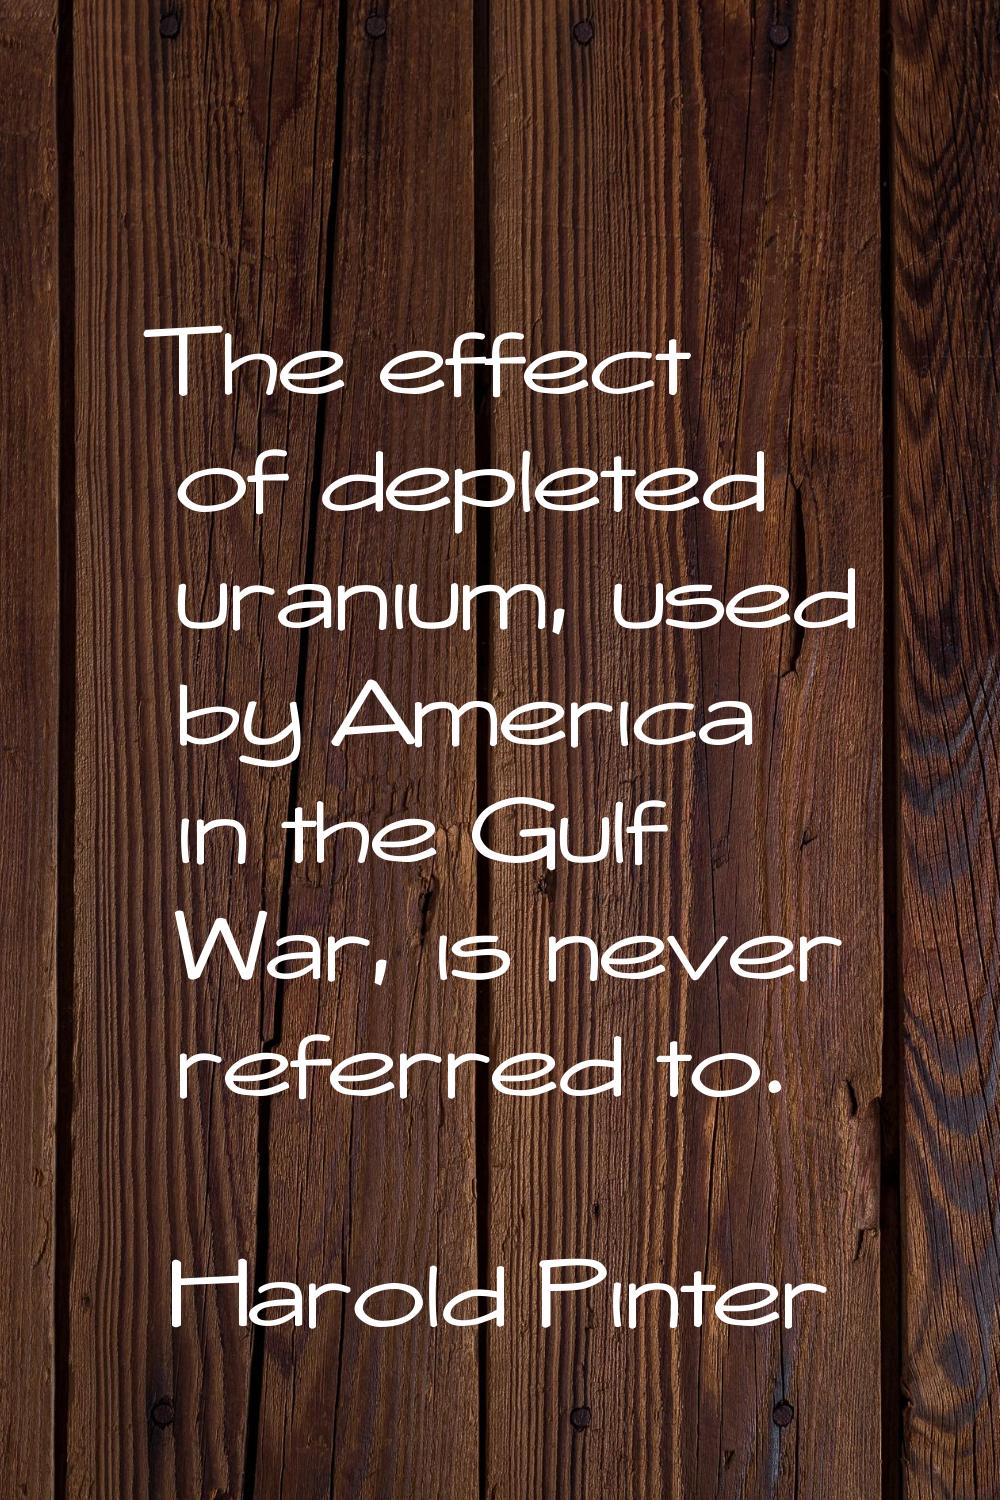 The effect of depleted uranium, used by America in the Gulf War, is never referred to.